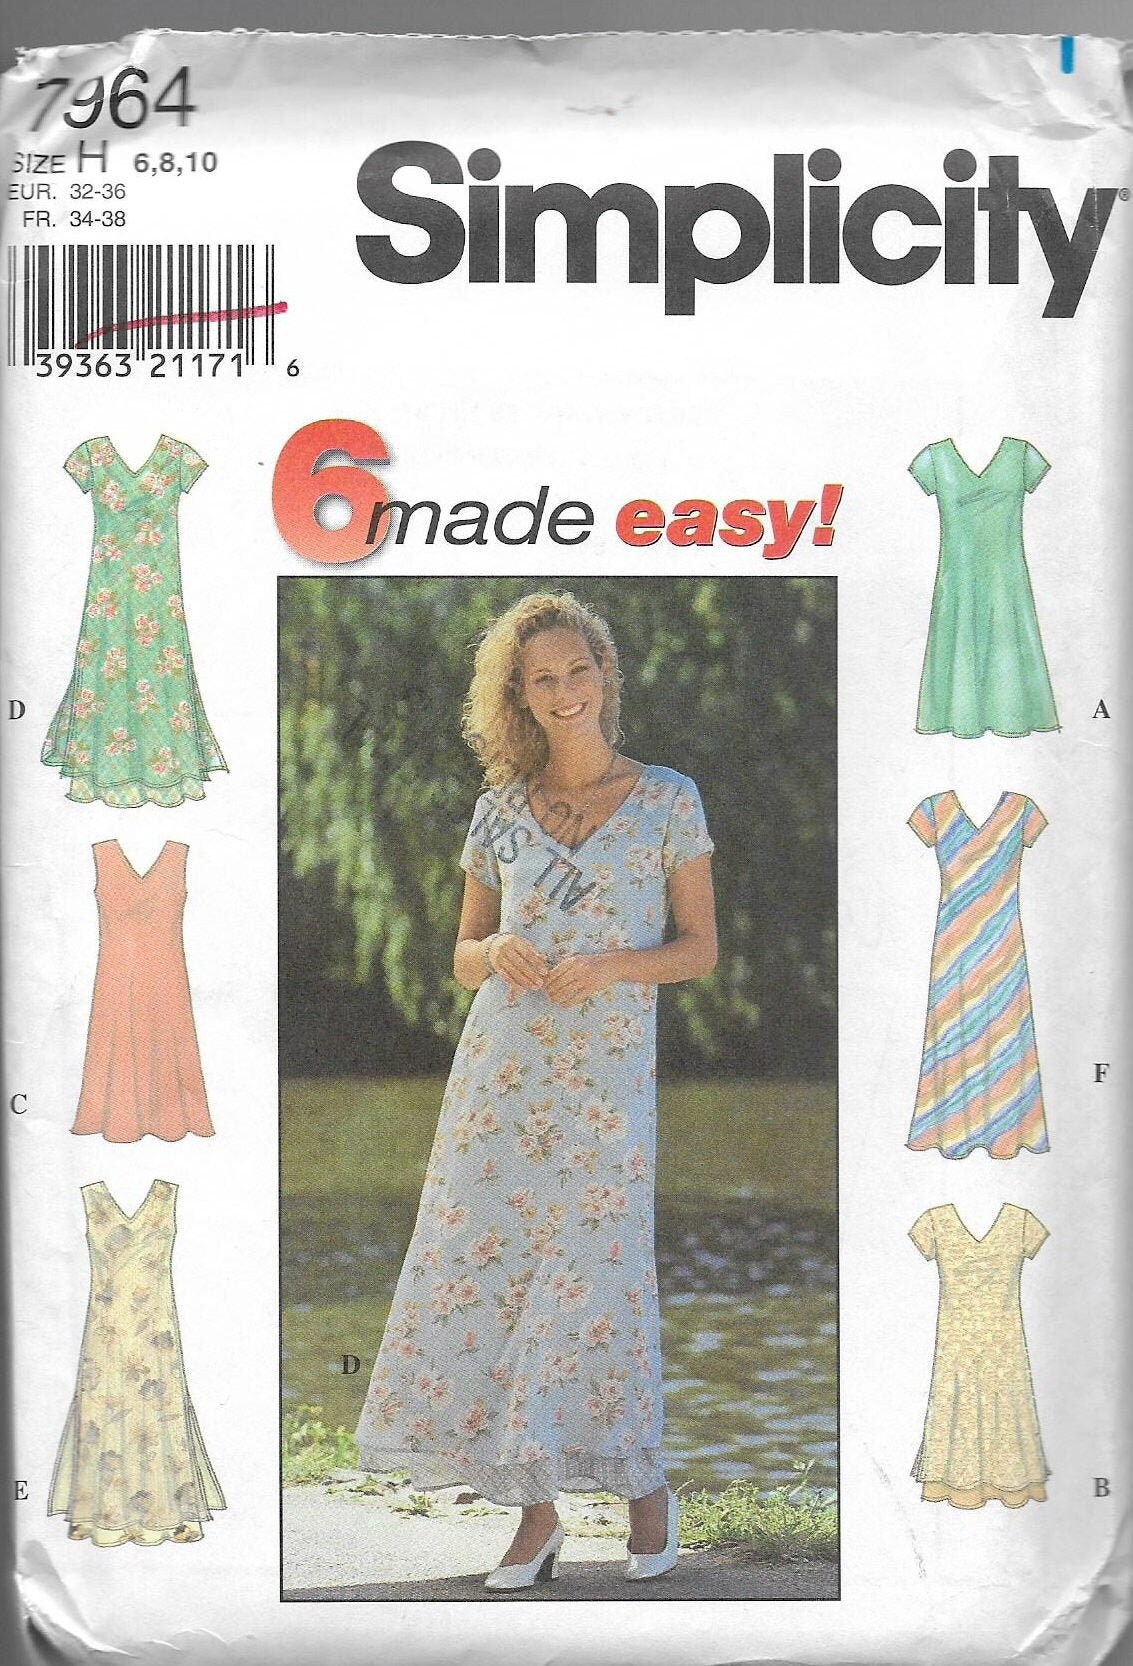 Uncut Misses Size 6-10 Sewing Pattern Simplicity 7964 | Etsy